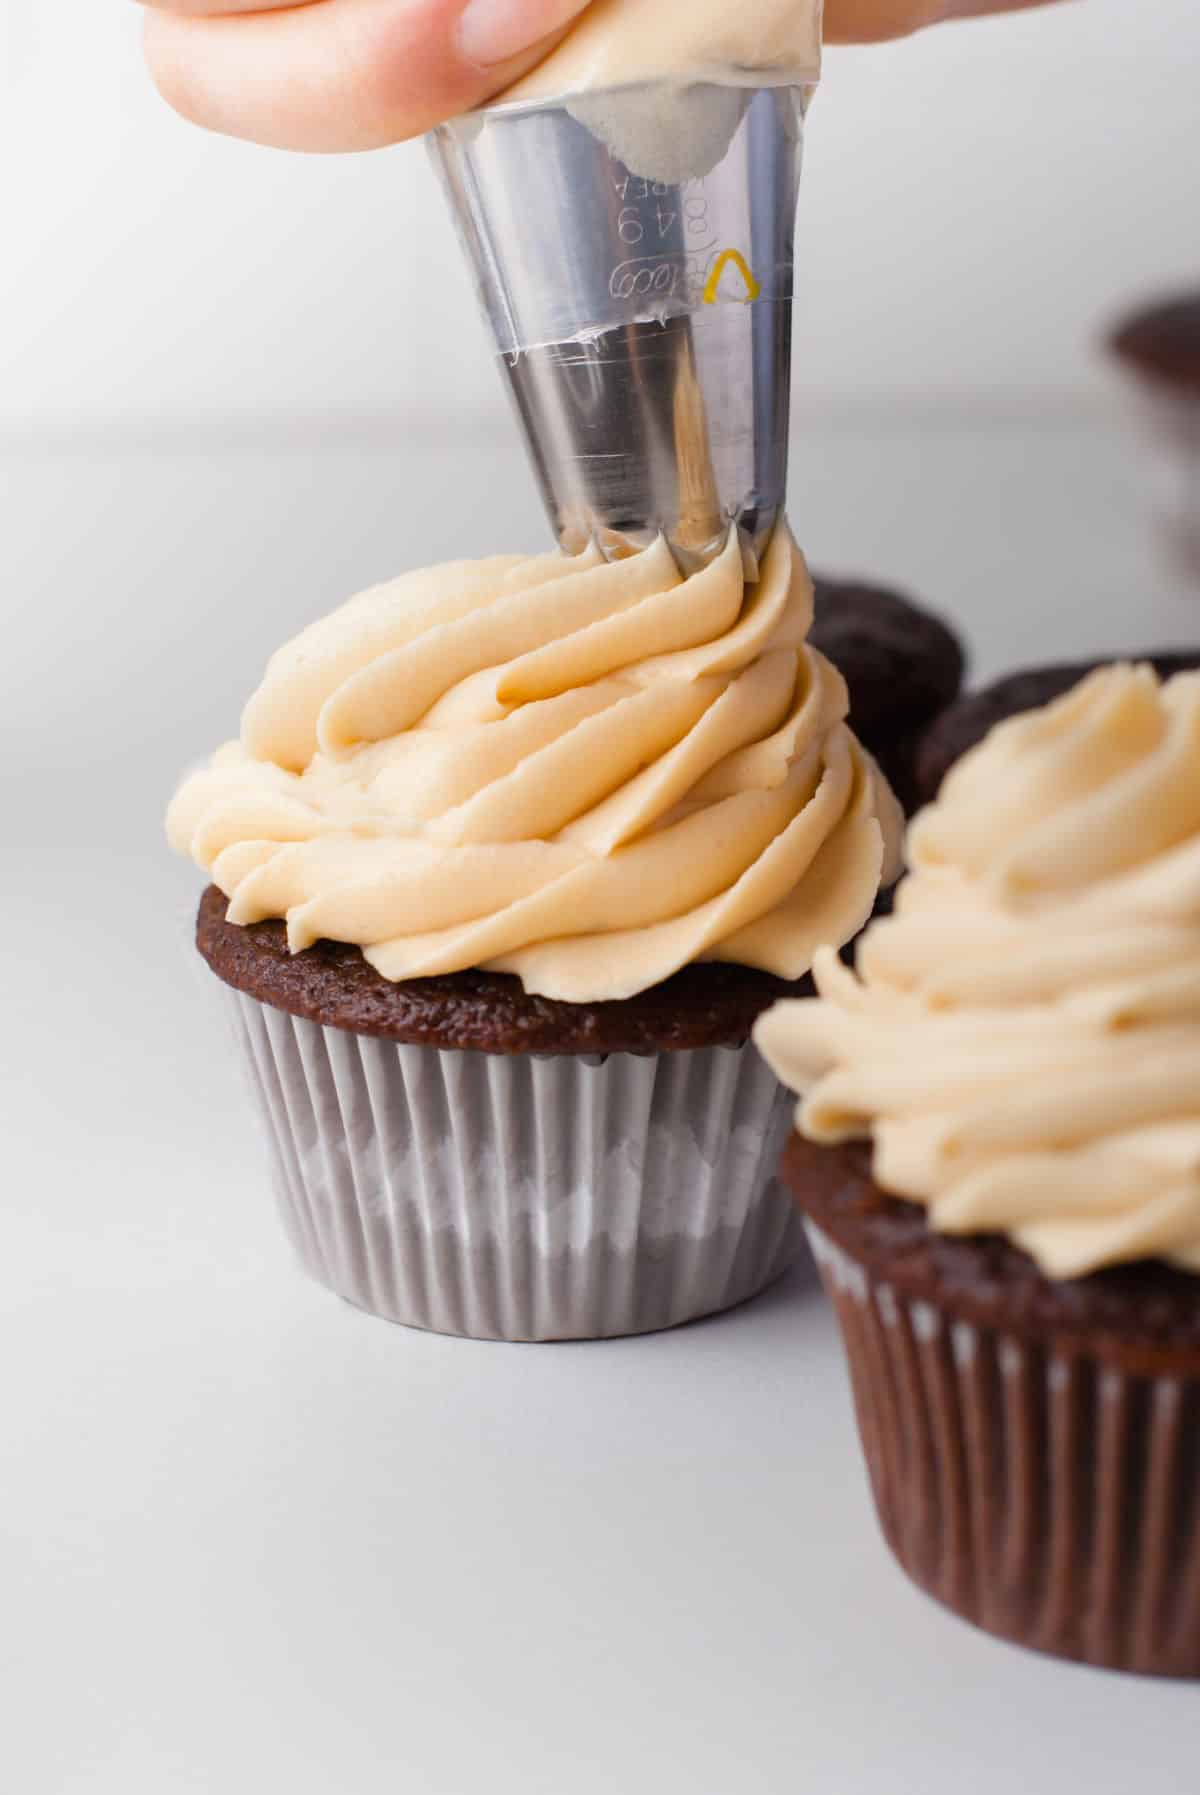 A piping bag piping caramel frosting onto a chocolate cupcake. 